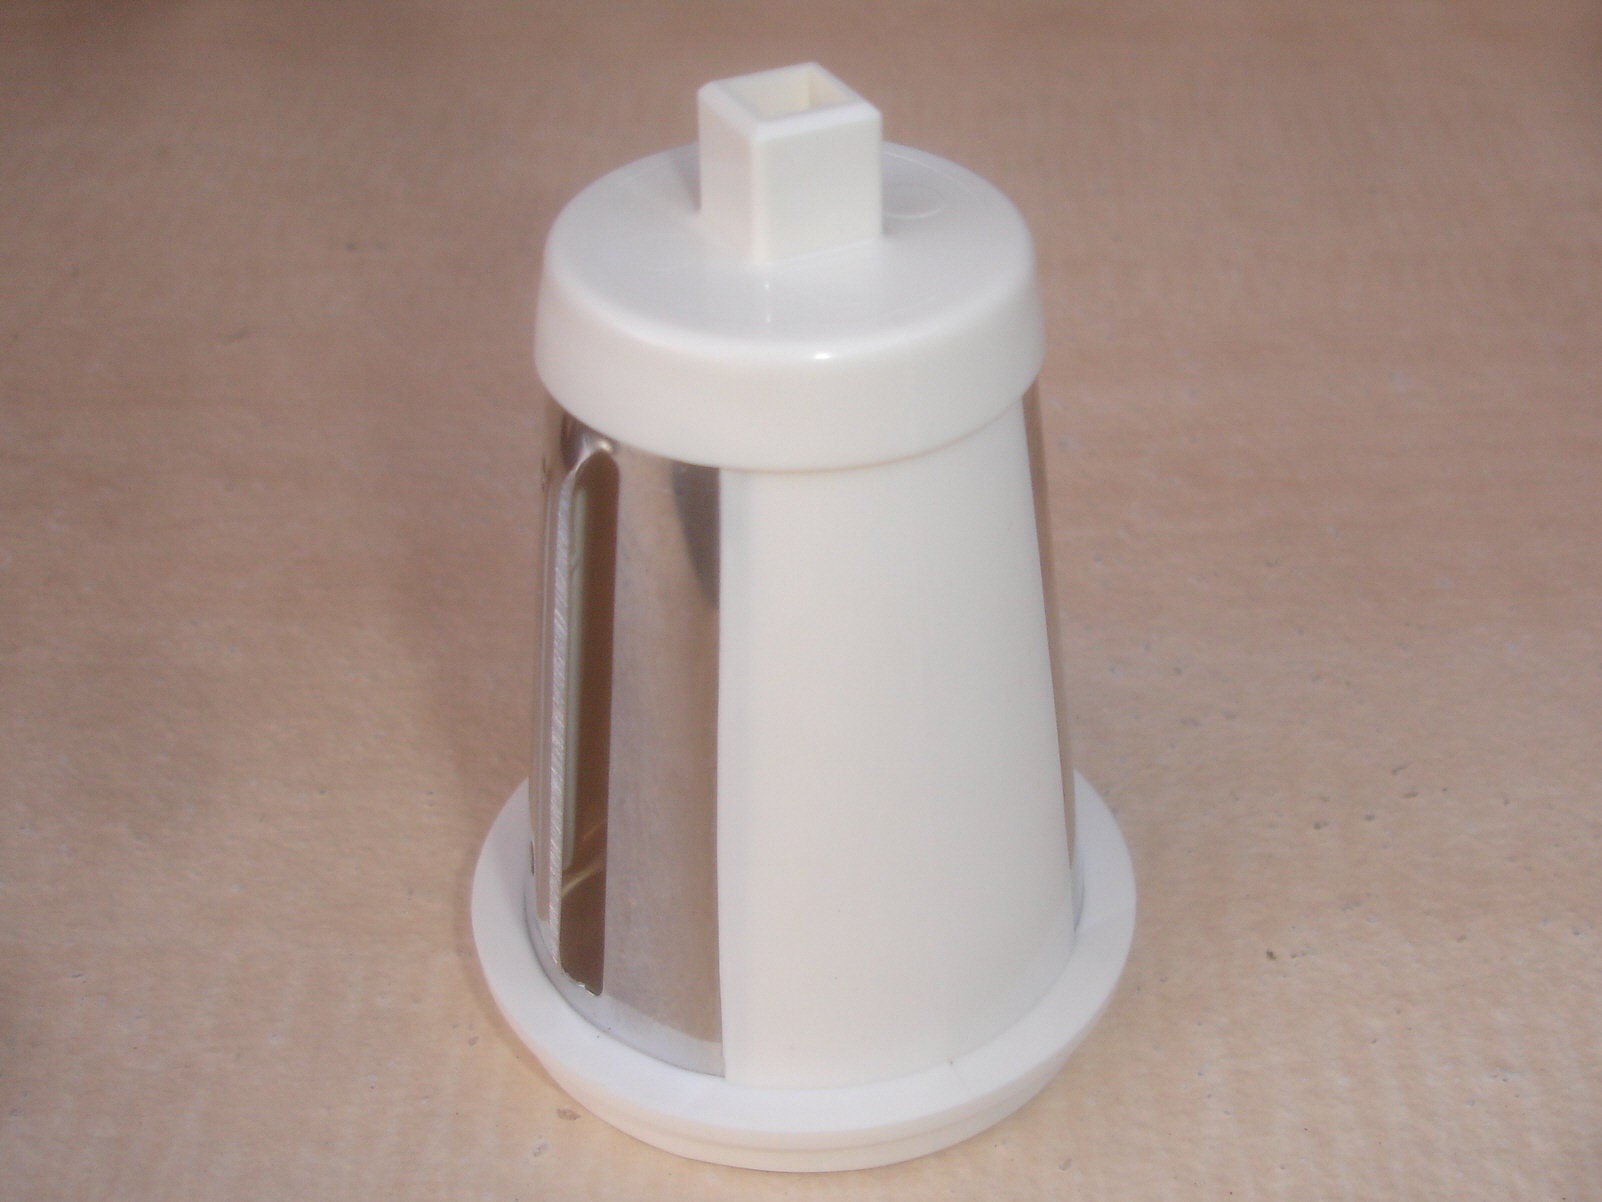 Fine Shred Replacement Cone for Presto Professional Salad Shooter